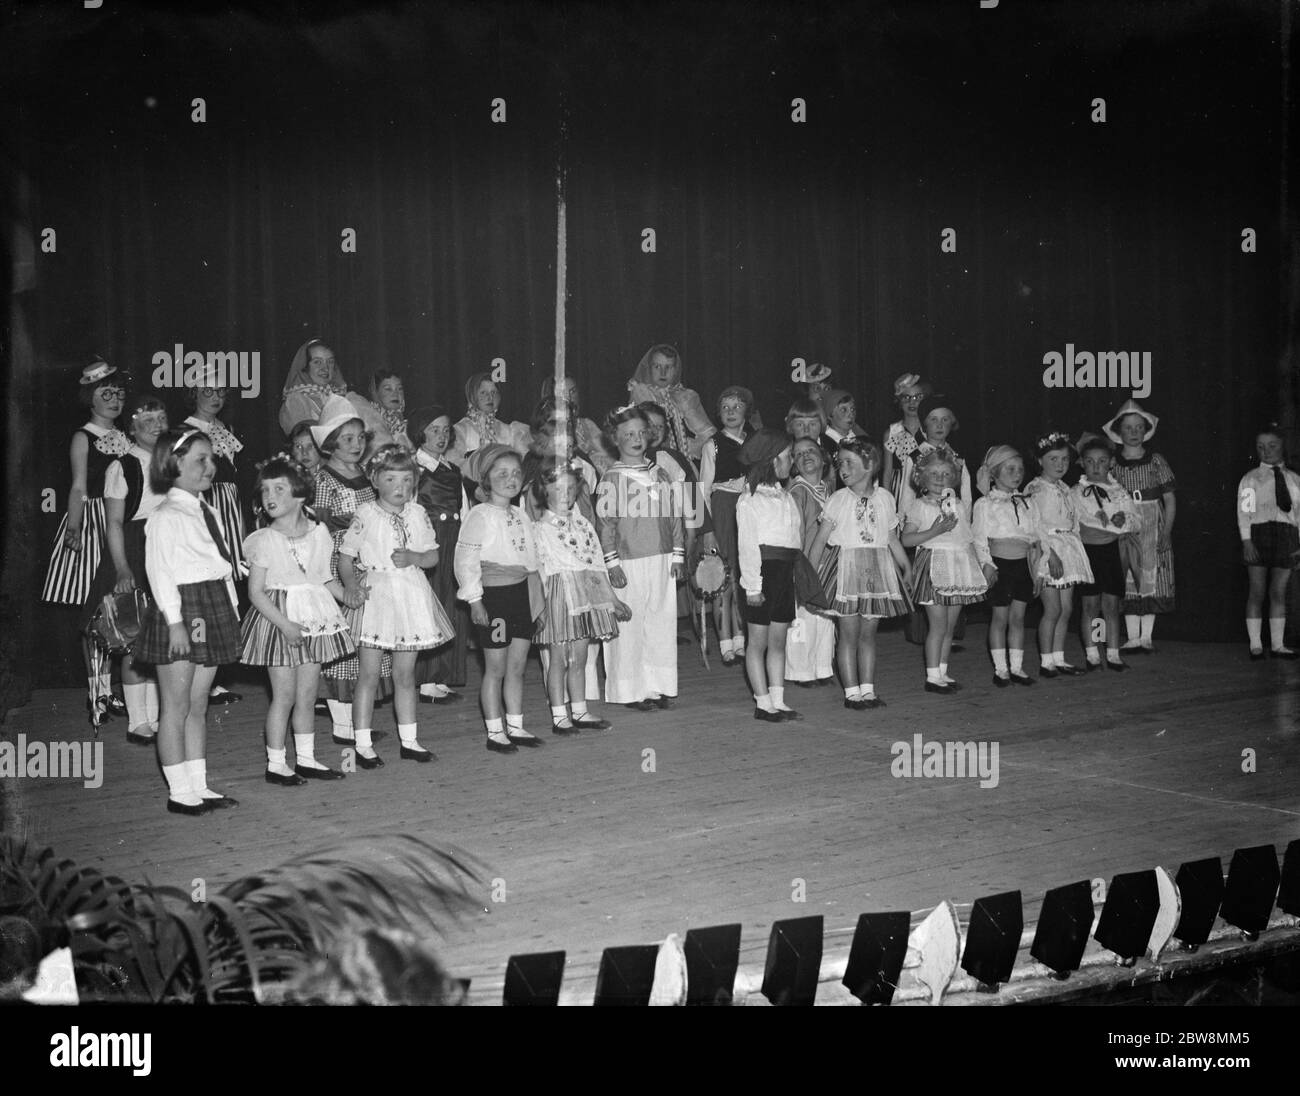 The Eltham Park School of dancing show off their fancy dress costumes . 1938 Stock Photo